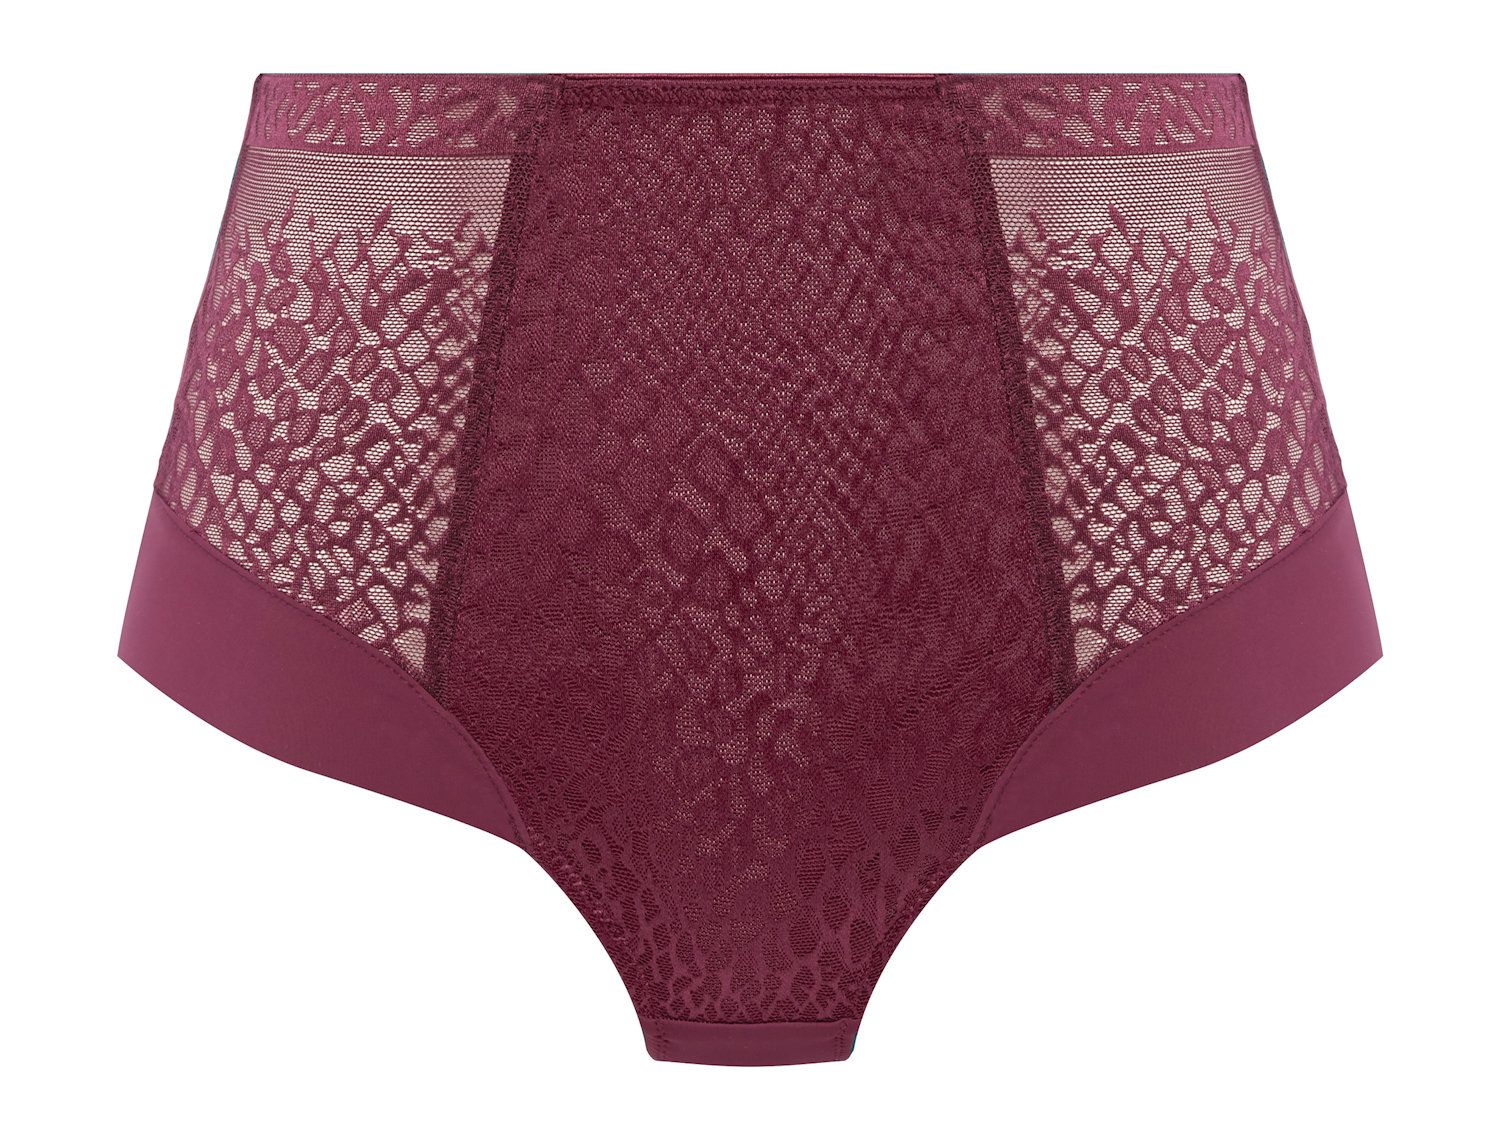 https://www.lumingerie.com/images/products/envisage-fl6918-high-waist-brief-f-mulberry-cutout_orig.jpg